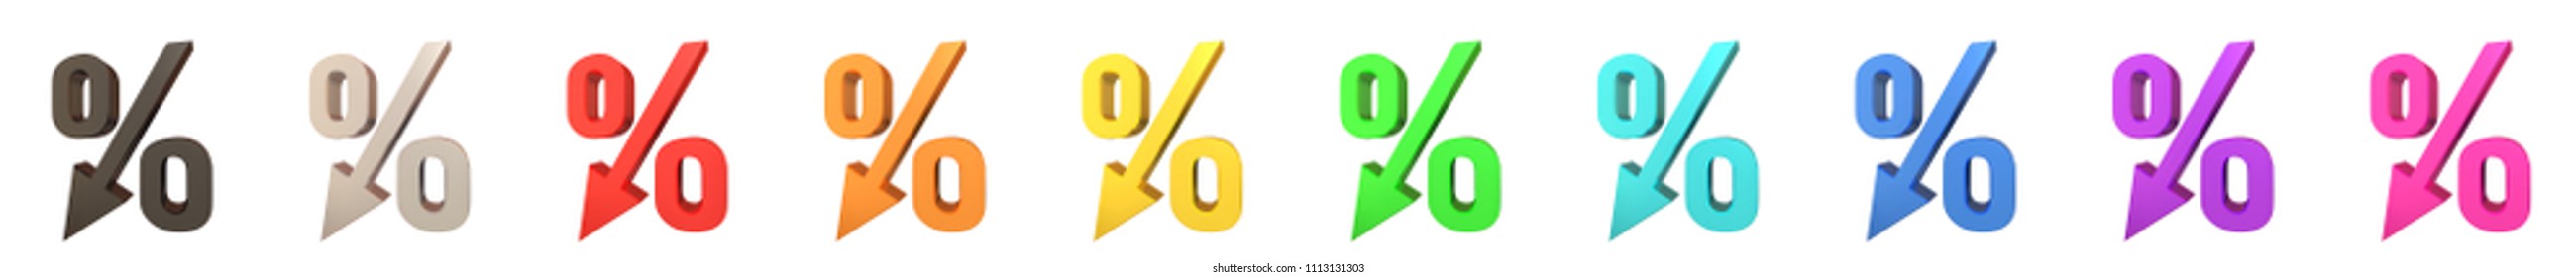 interest-rate-discount-sale-price-falling-stock-illustration-1113131303